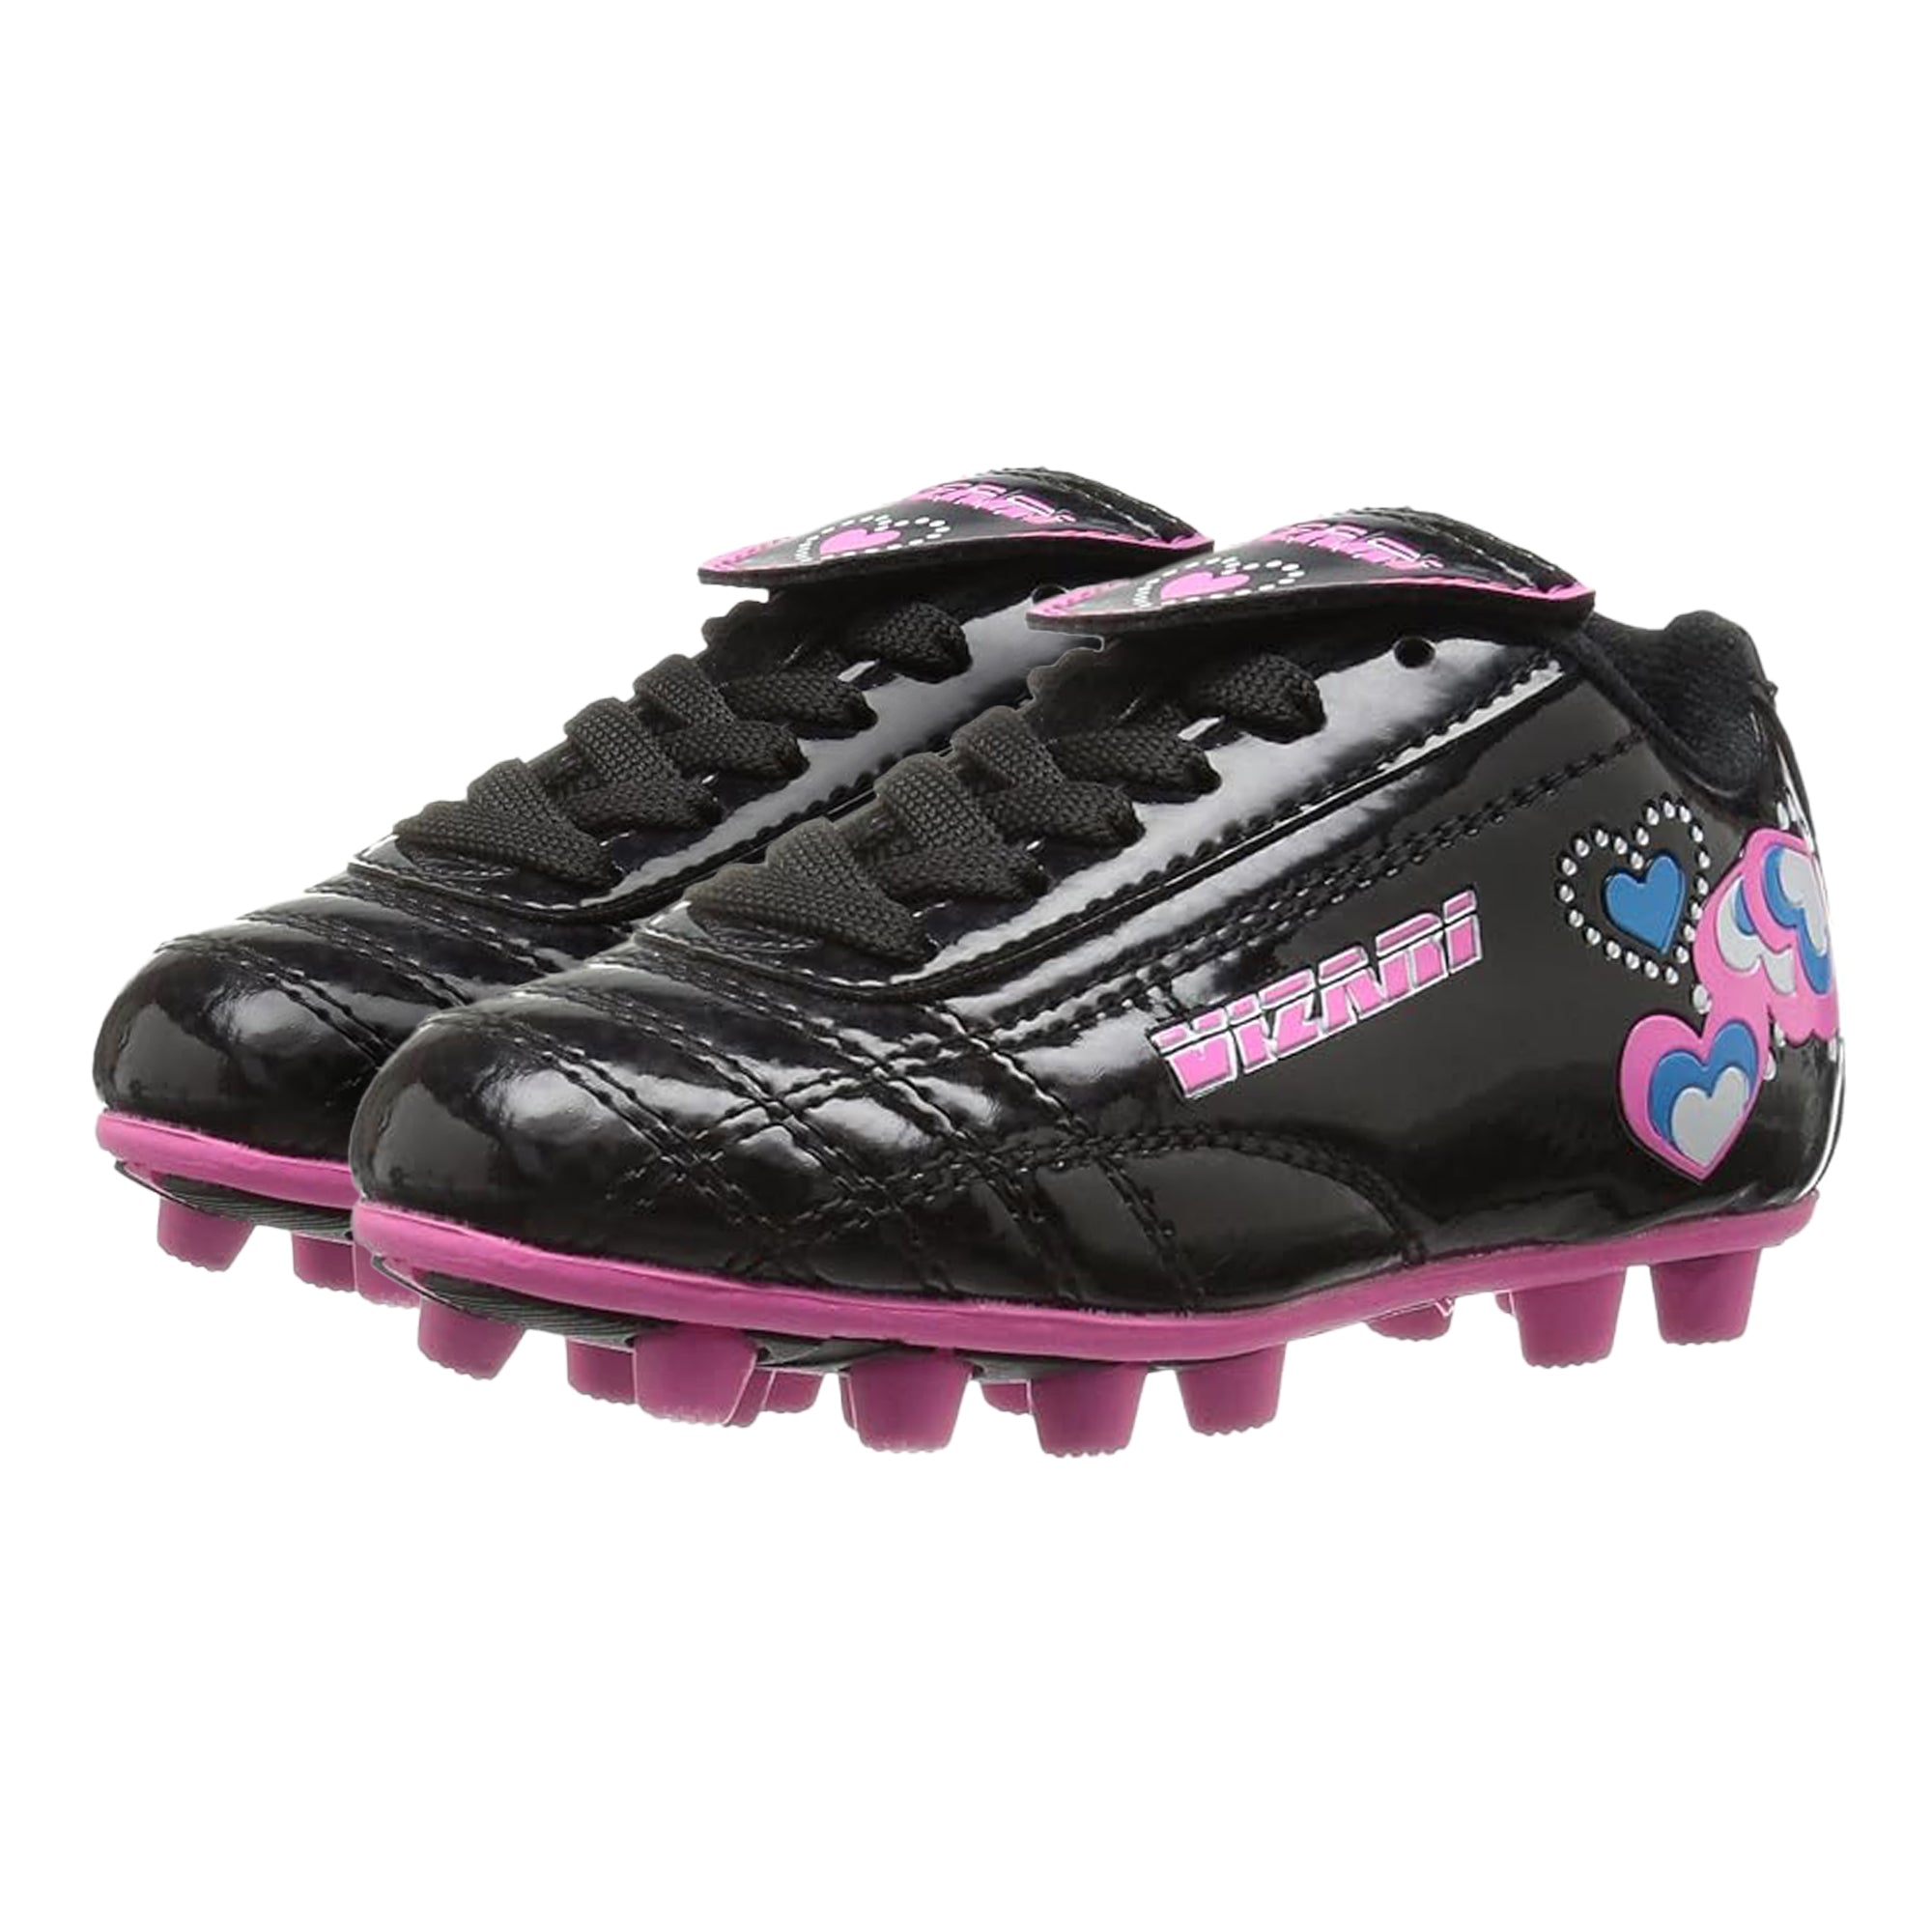 Shiny Retro Hearts Firm Ground Soccer Shoes -Black/Pink